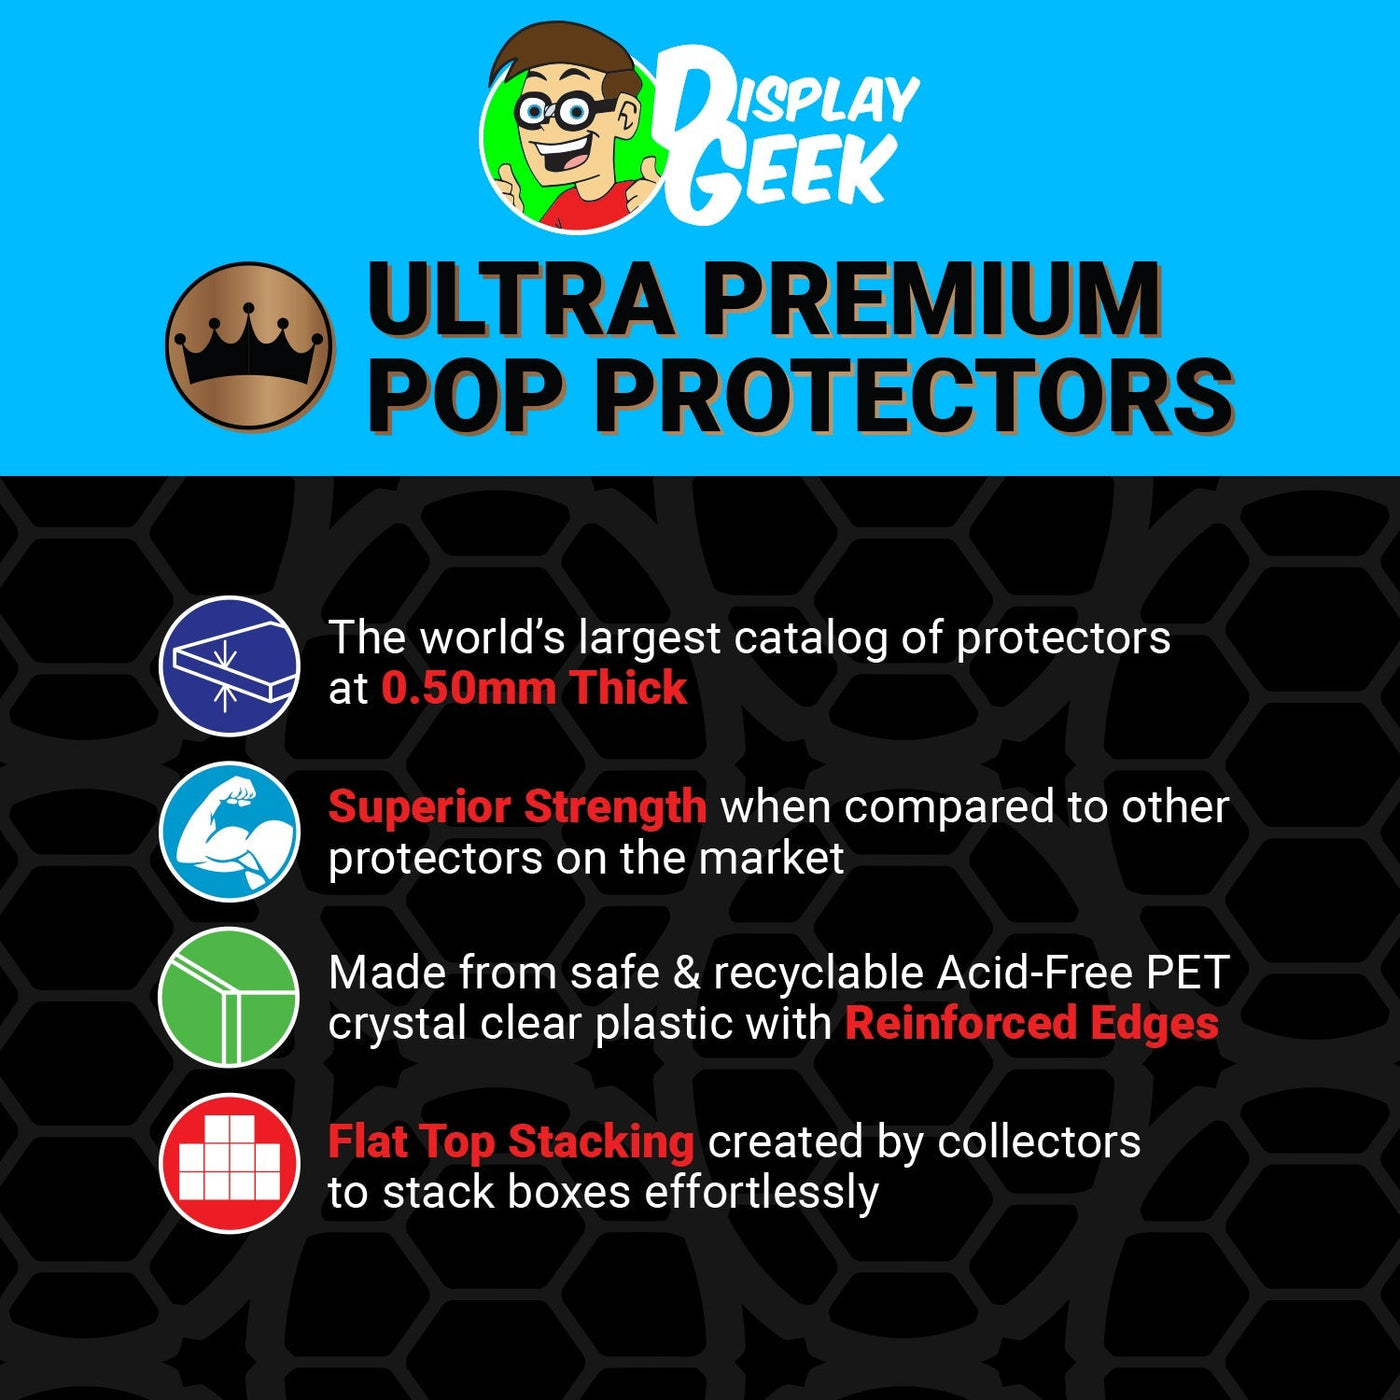 Pop Protector for Zero in Doghouse Chase Glow #436 Funko Pop Movie Moments on The Protector Guide App by Display Geek